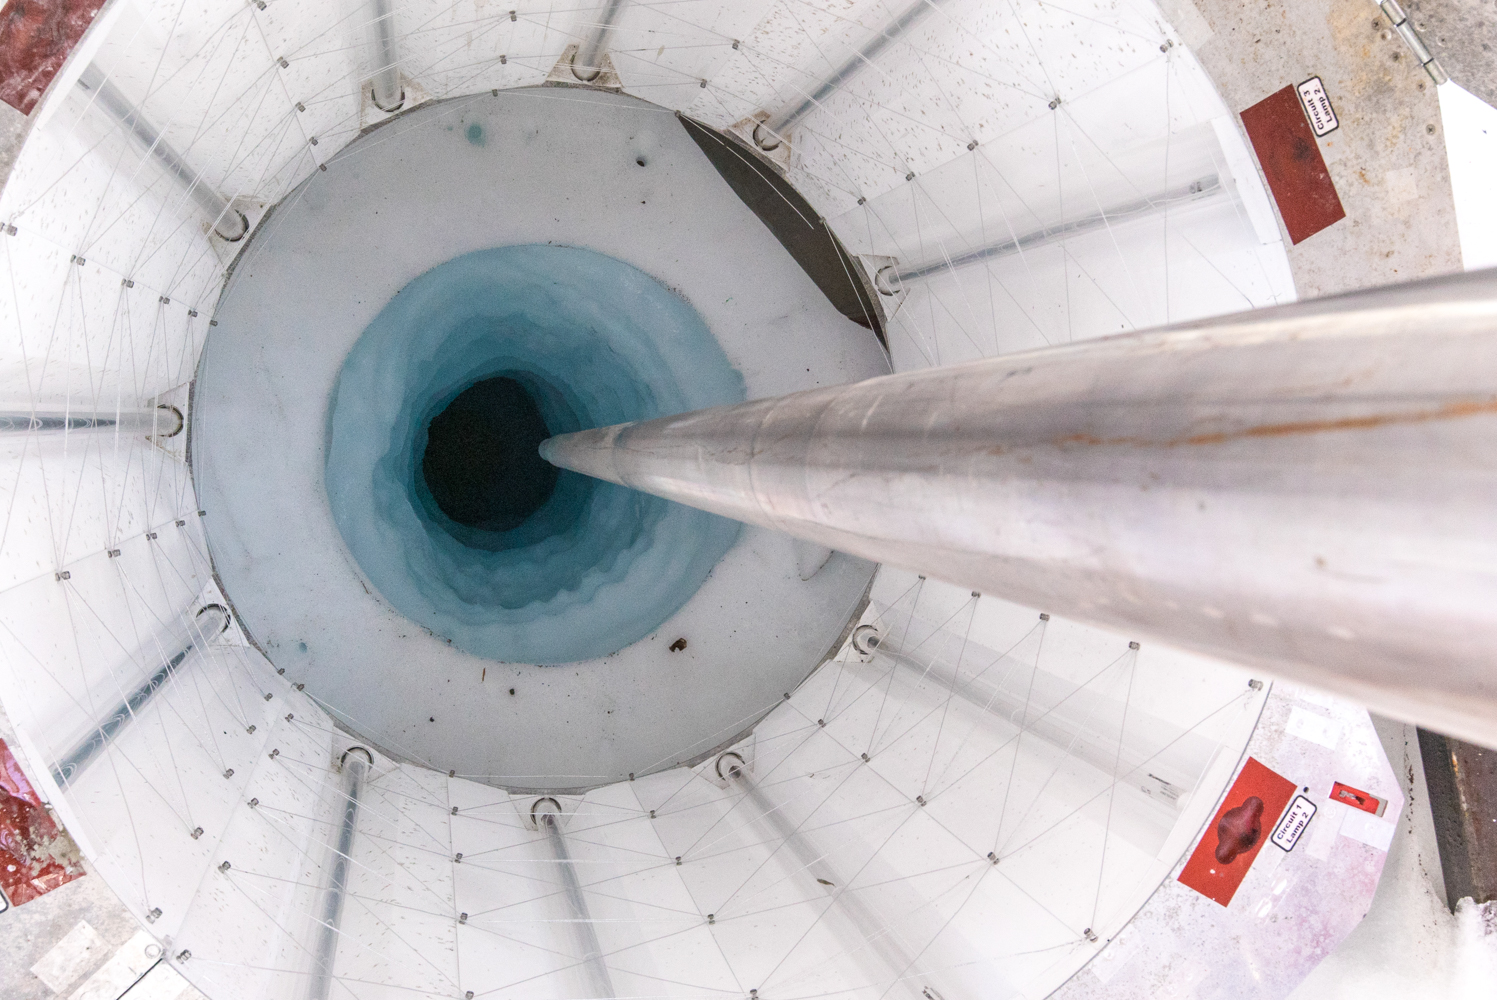 A hot water drill punctured holes thousands of feet deep into ice to collect samples.